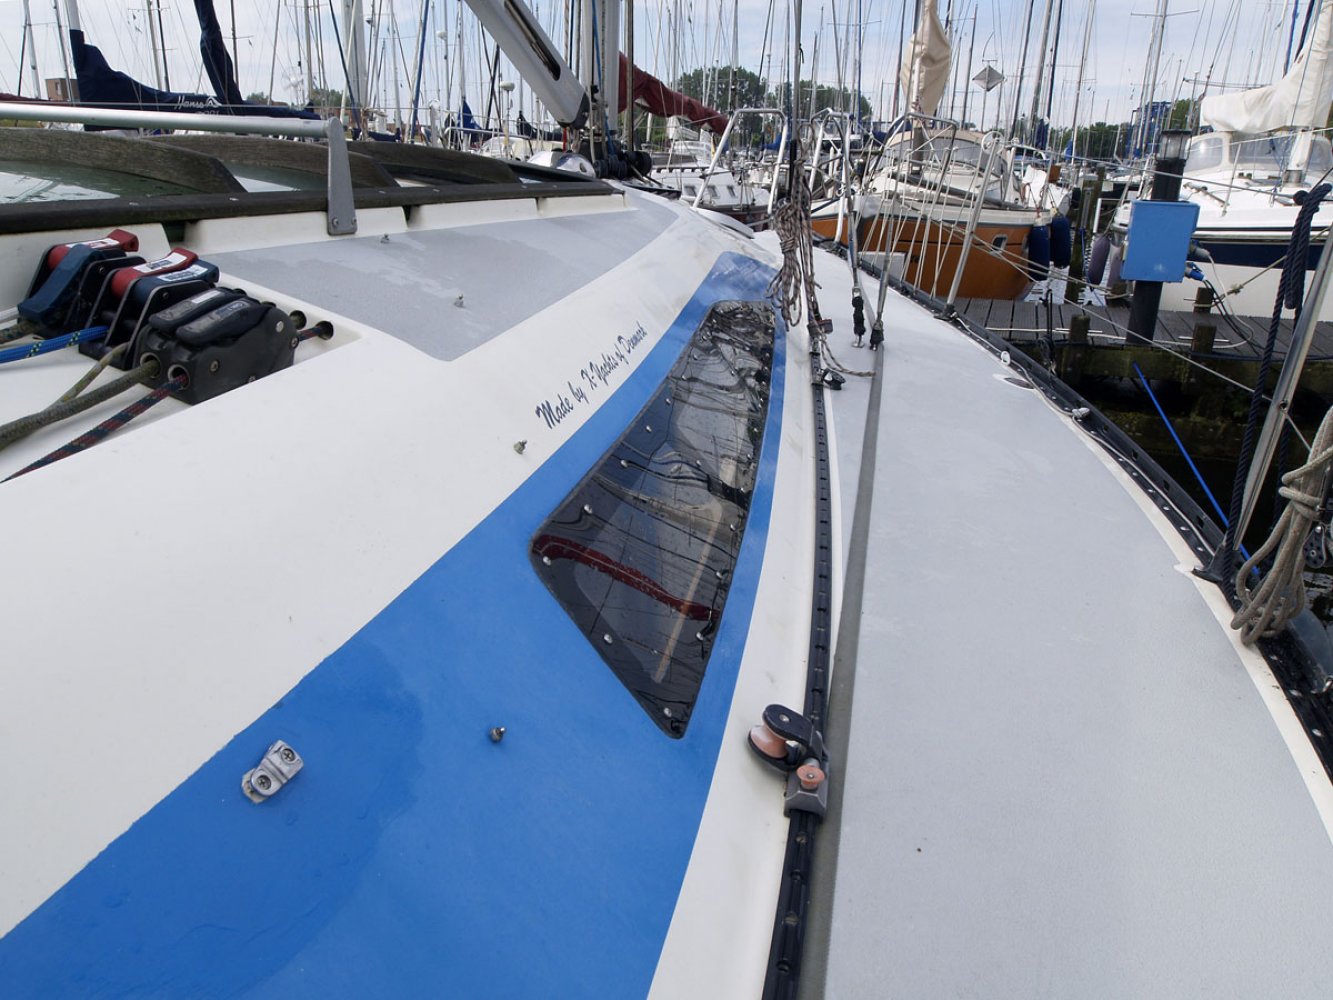 x 95 sailboat for sale